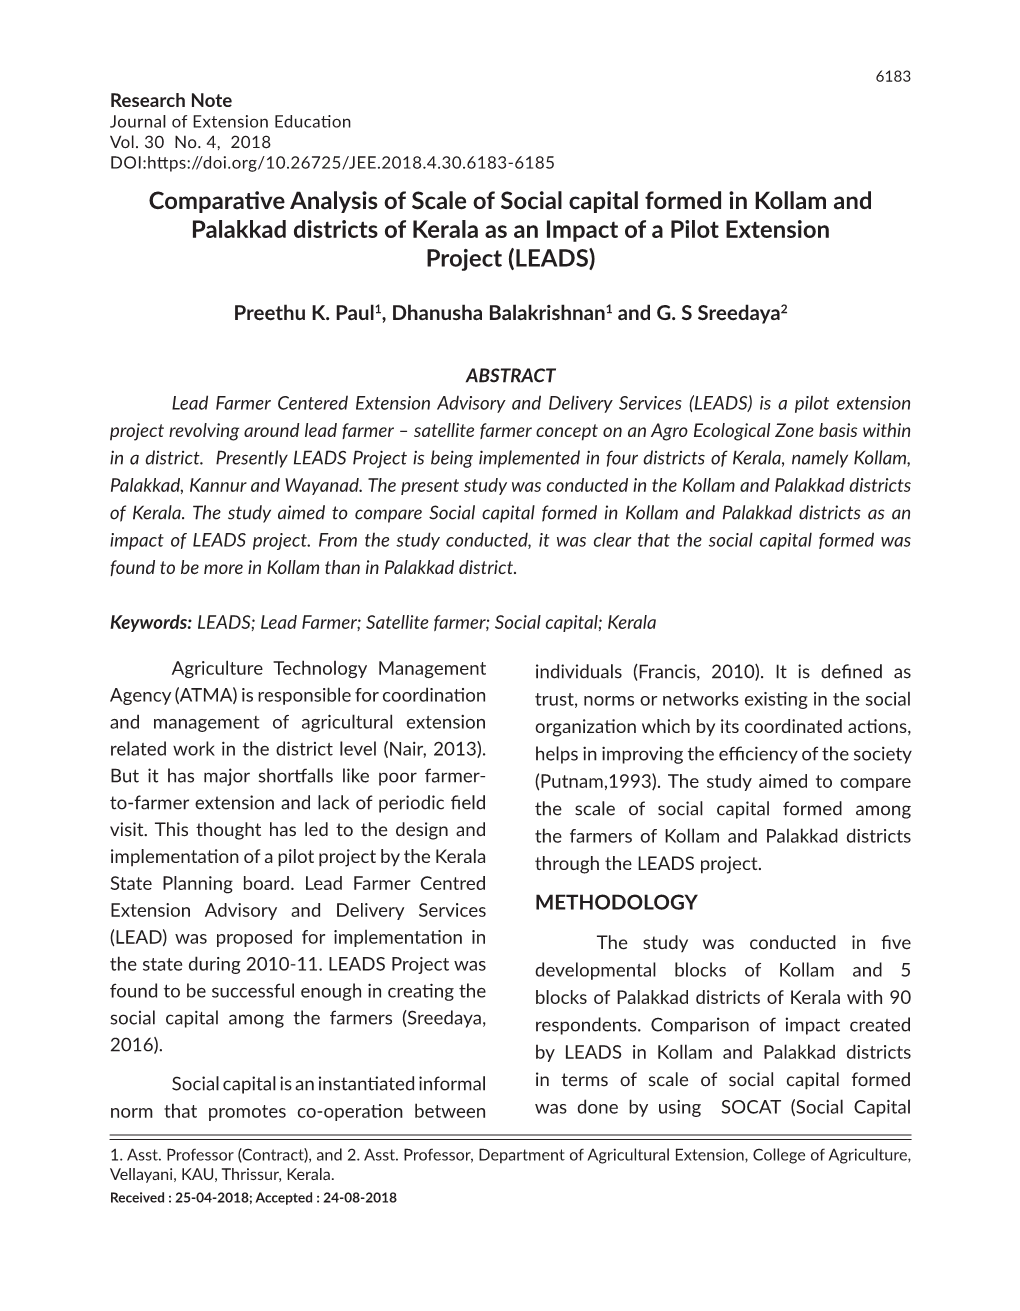 Comparative Analysis of Scale of Social Capital Formed in Kollam and Palakkad Districts of Kerala As an Impact of a Pilot Extension Project (LEADS)